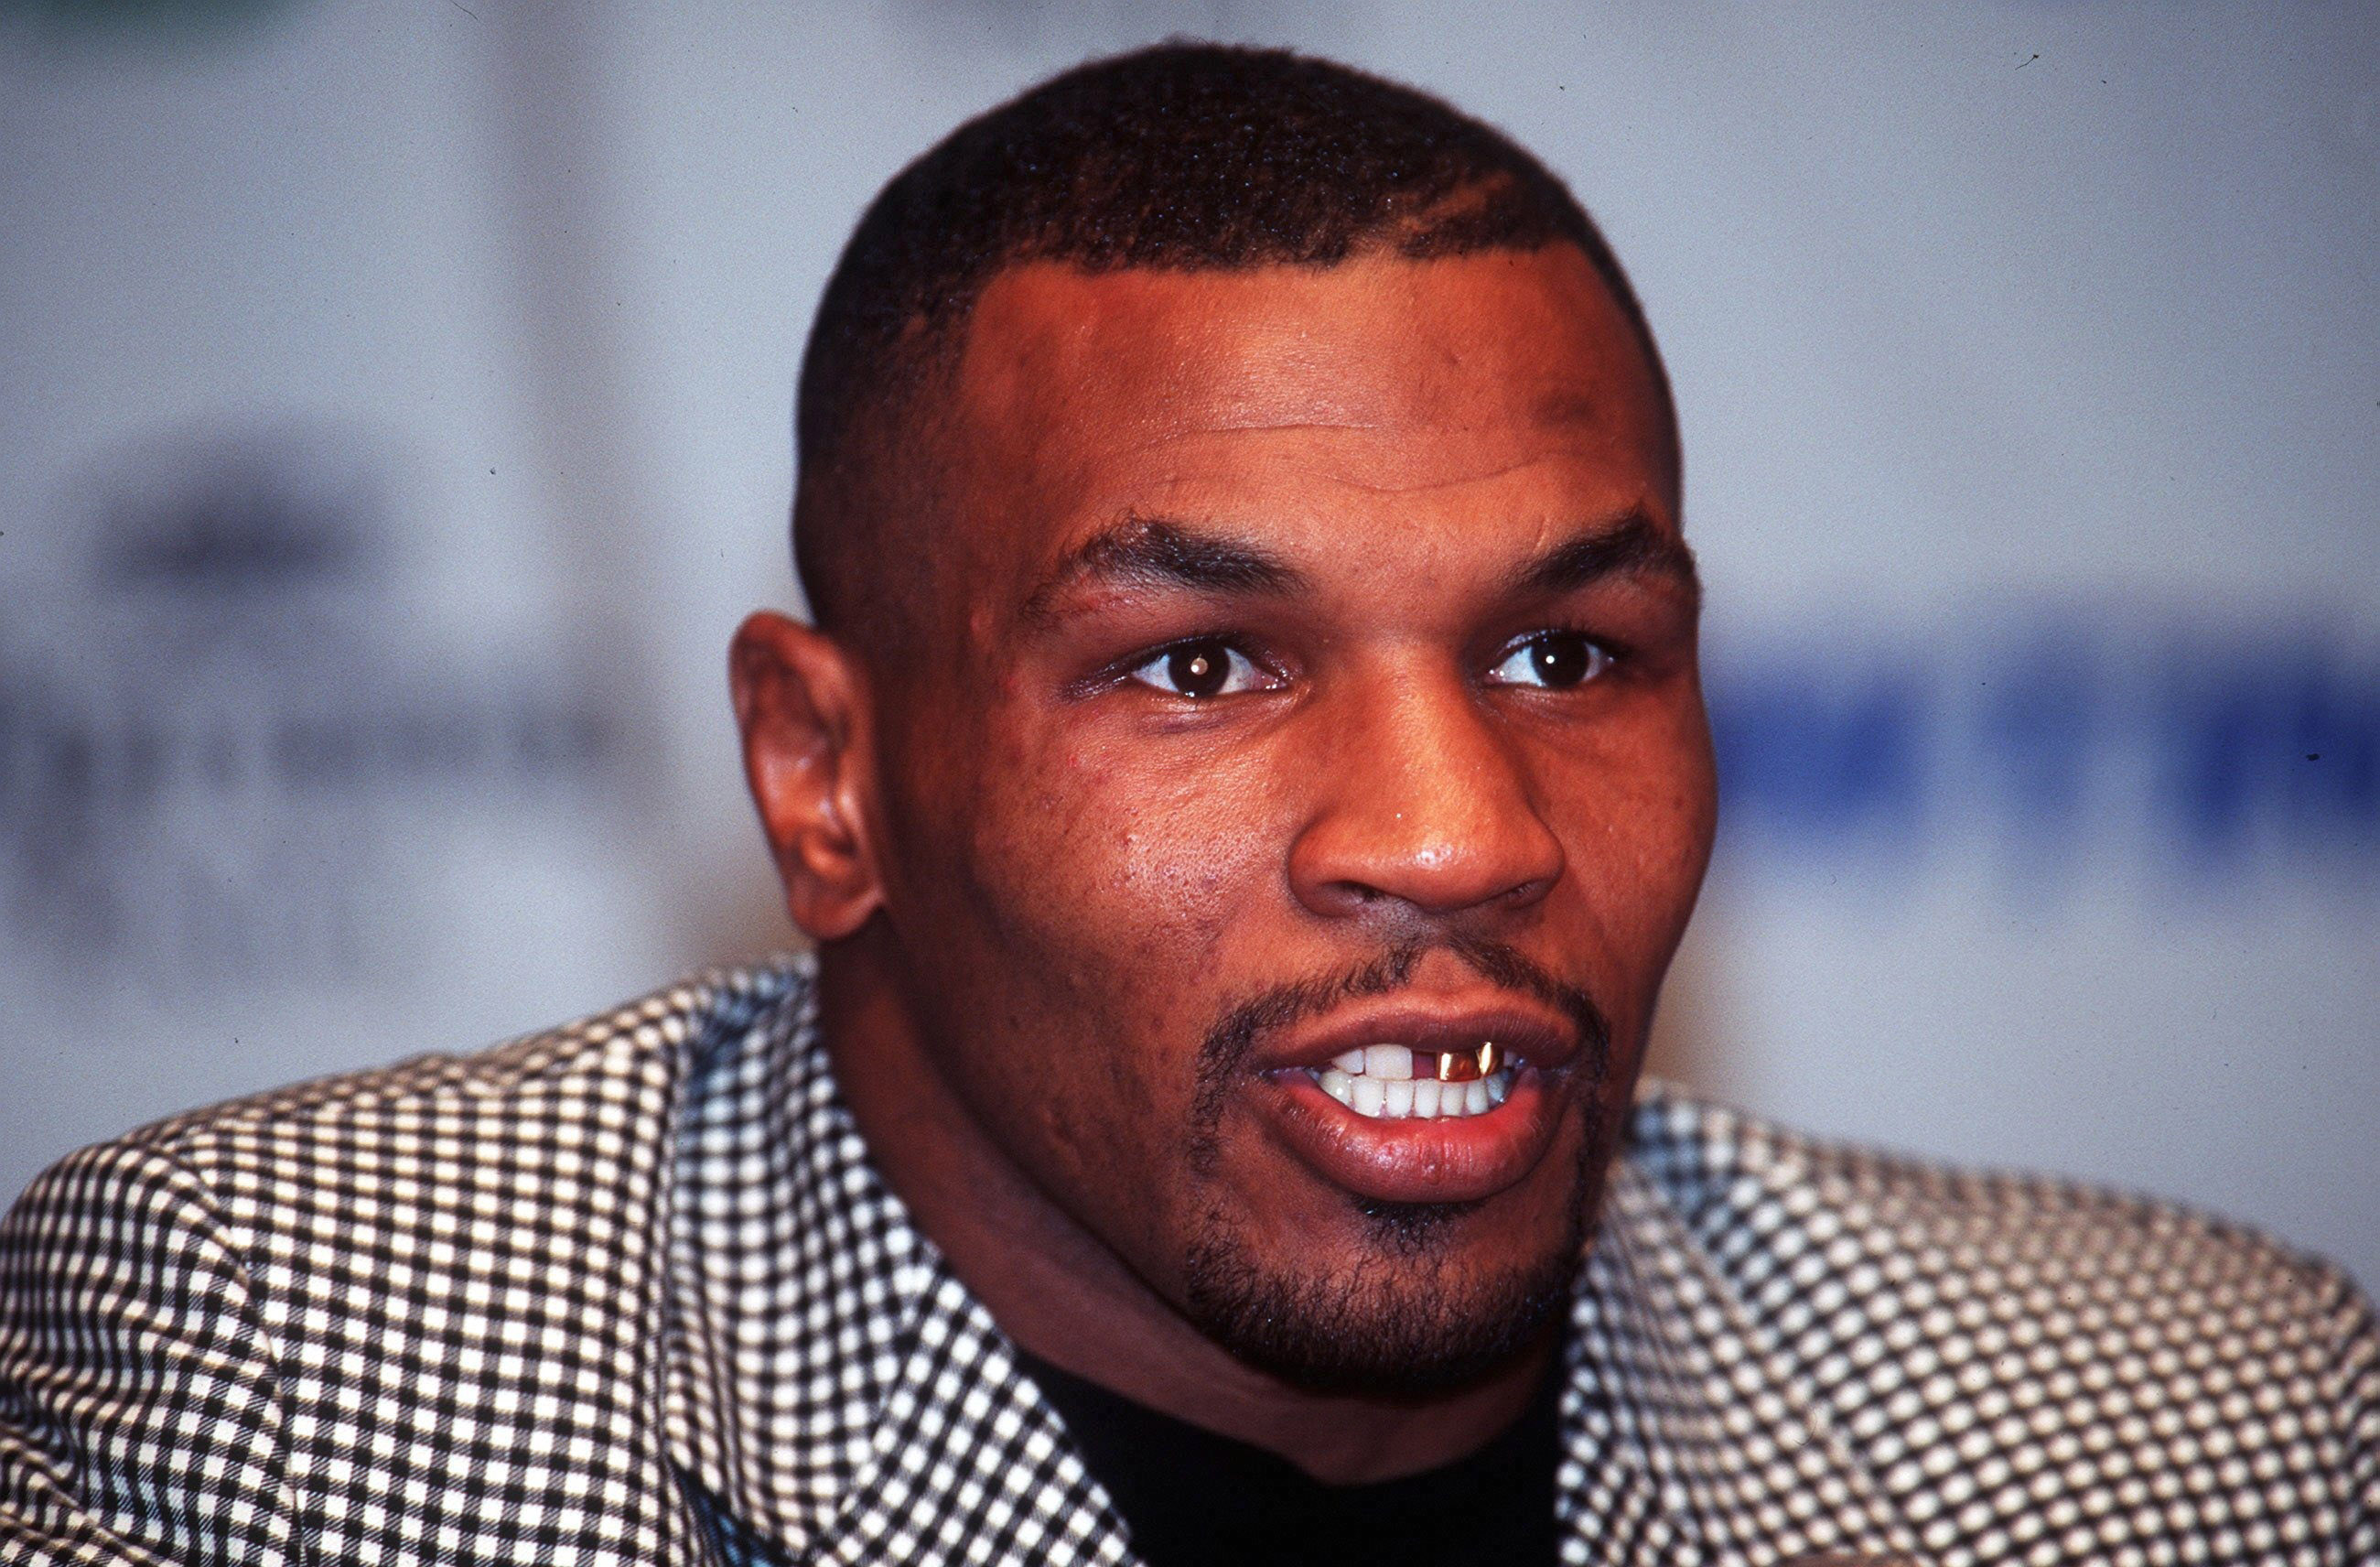 Mike Tyson on August 19, 1995, in Las Vegas | Source: Getty Images